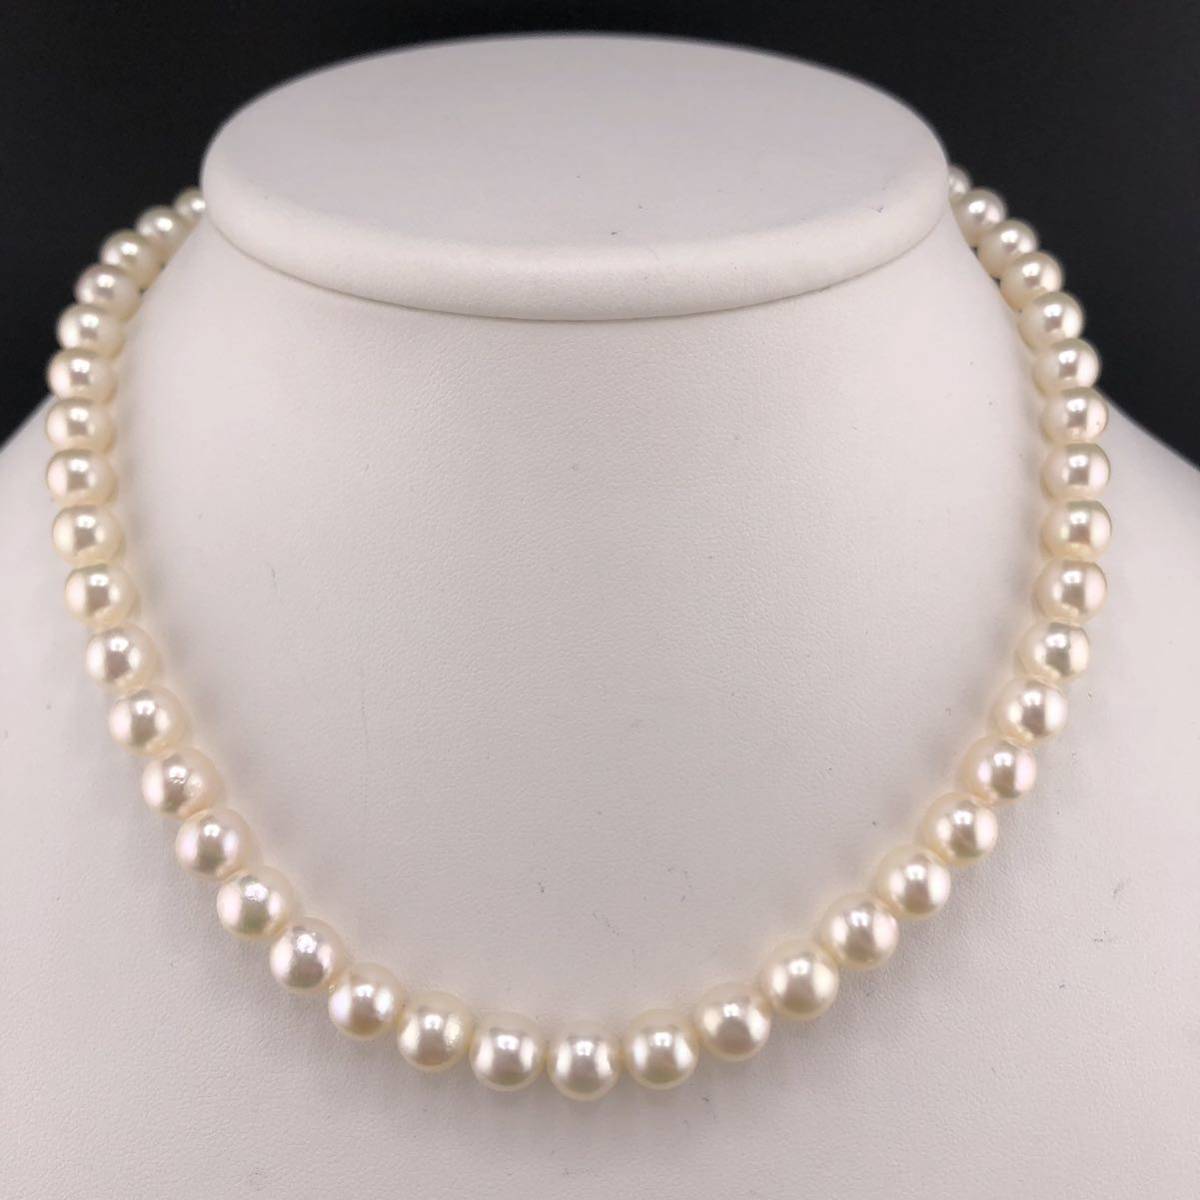 E02-2873 箱付き☆アコヤパールネックレス 7.5mm~8.0mm 40g ( アコヤ真珠 Pearl necklace SILVER )